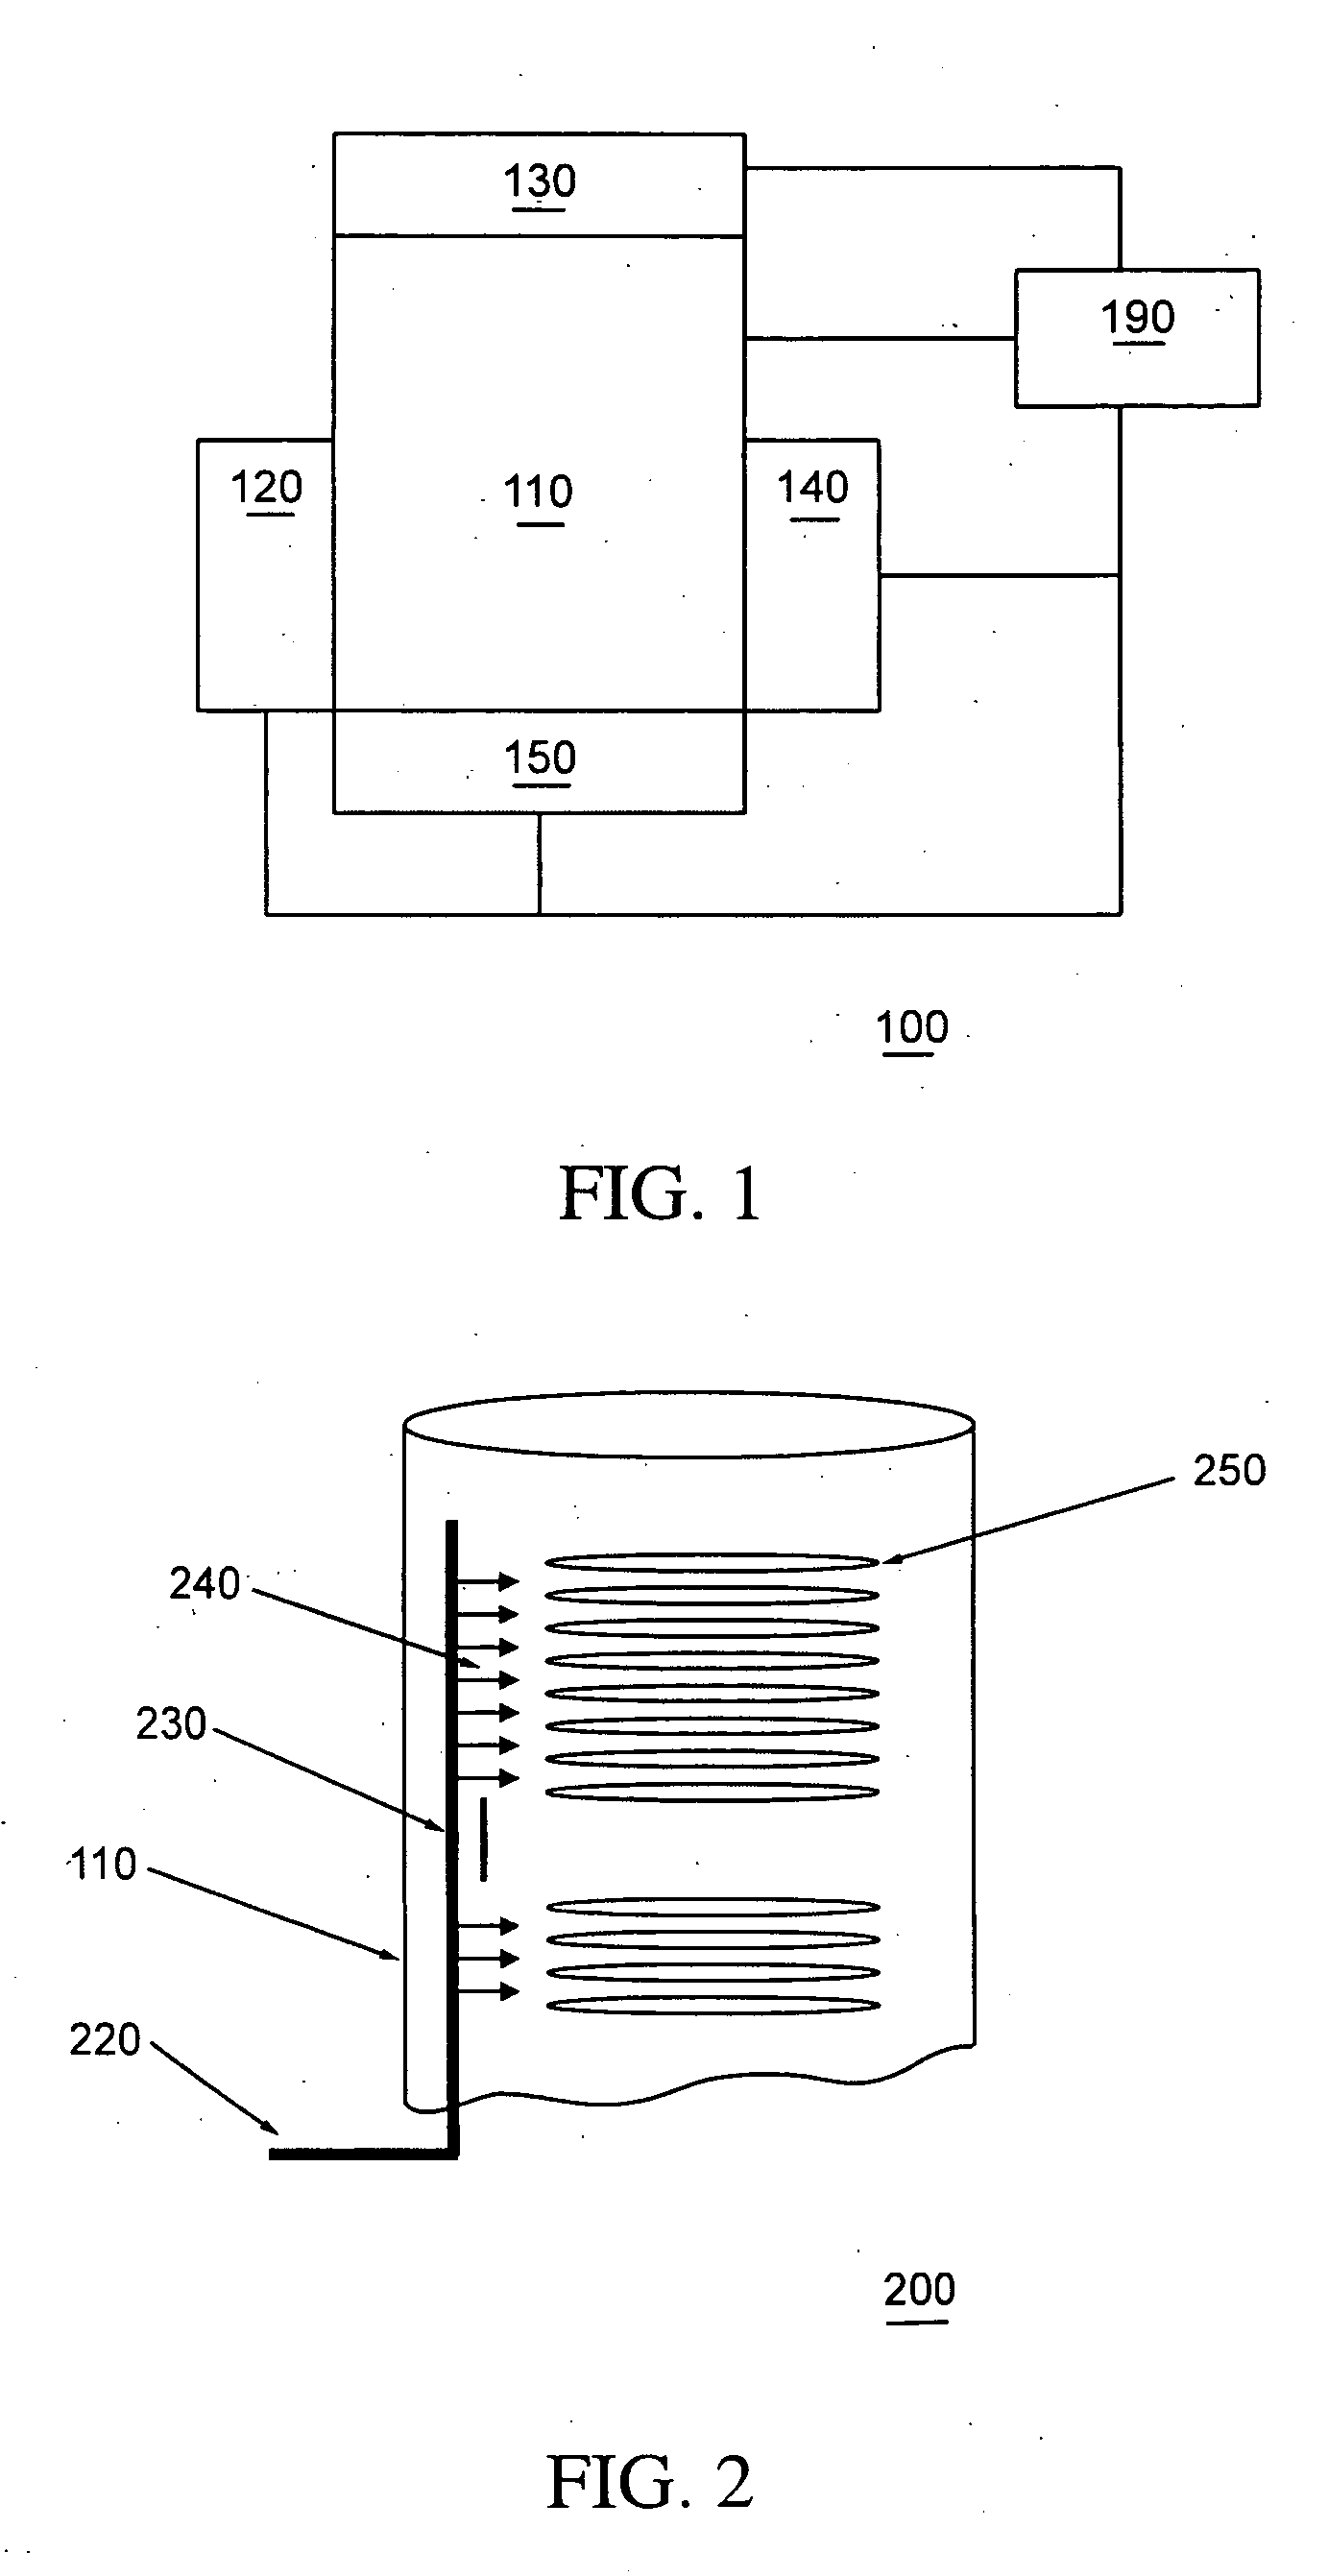 Method and apparatus for monolayer deposition (MLD)